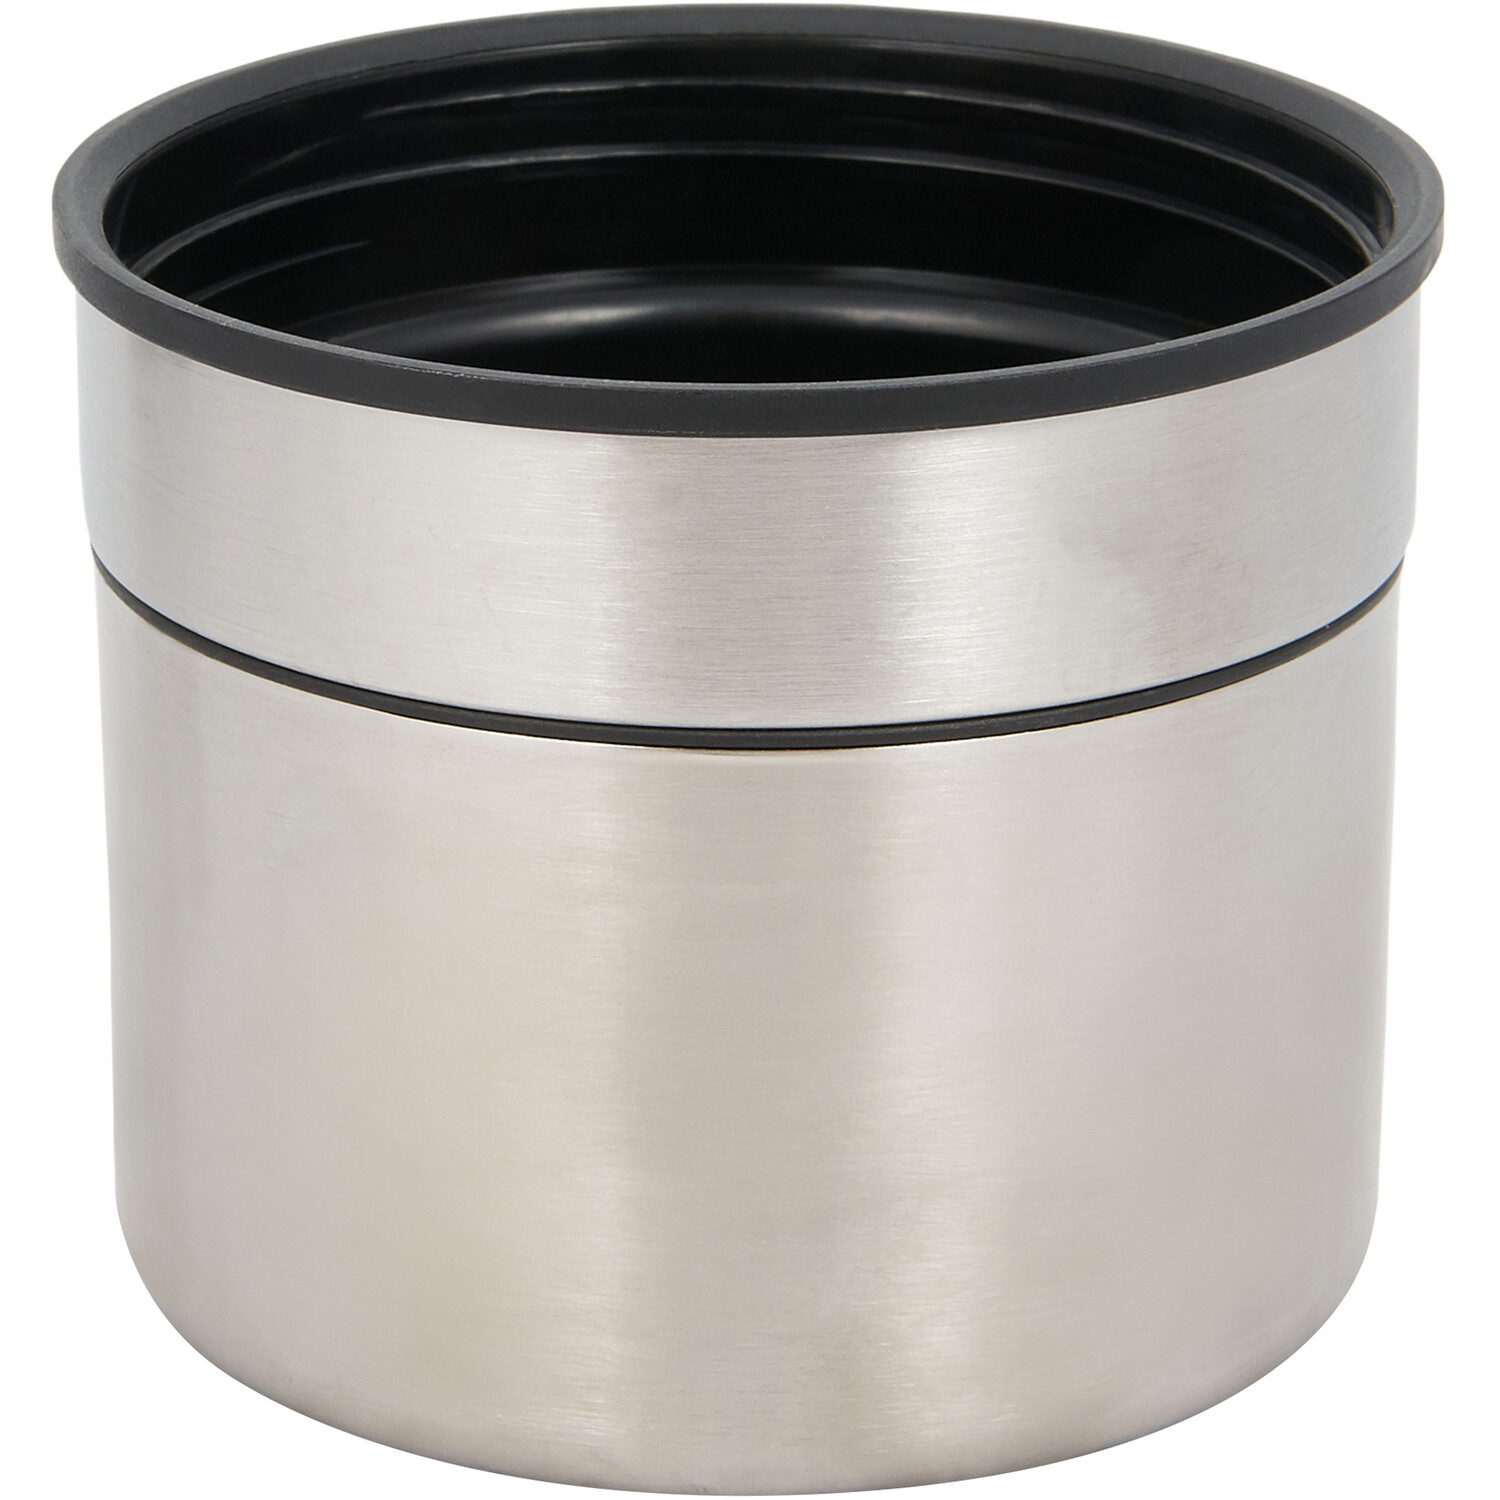 Nitro 2-Cup Flask - Silver Image 5